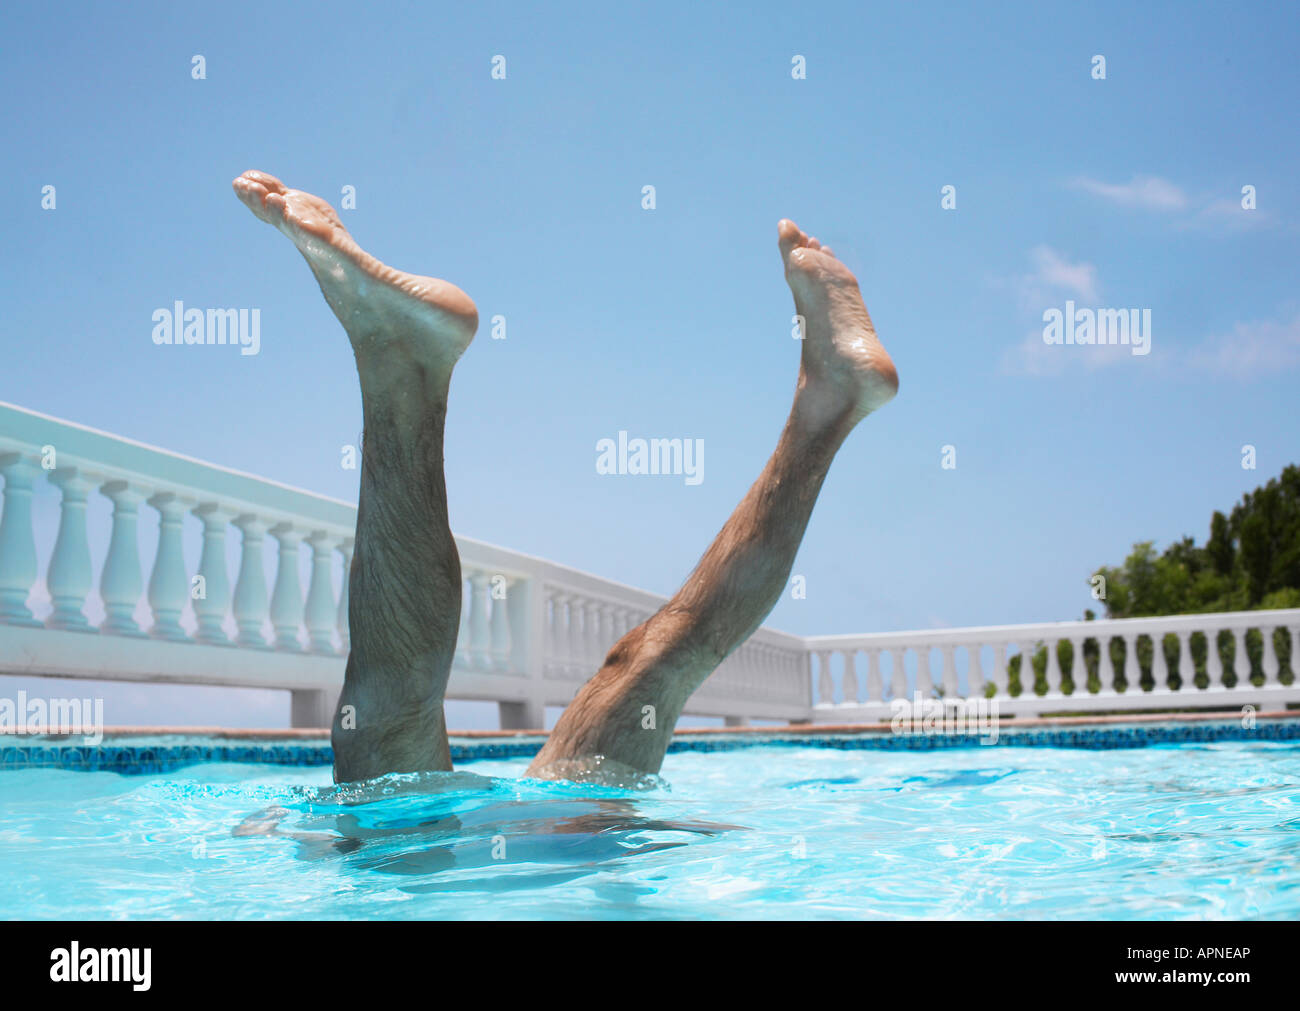 Man doing handstand in swimming pool, legs above surface Stock Photo